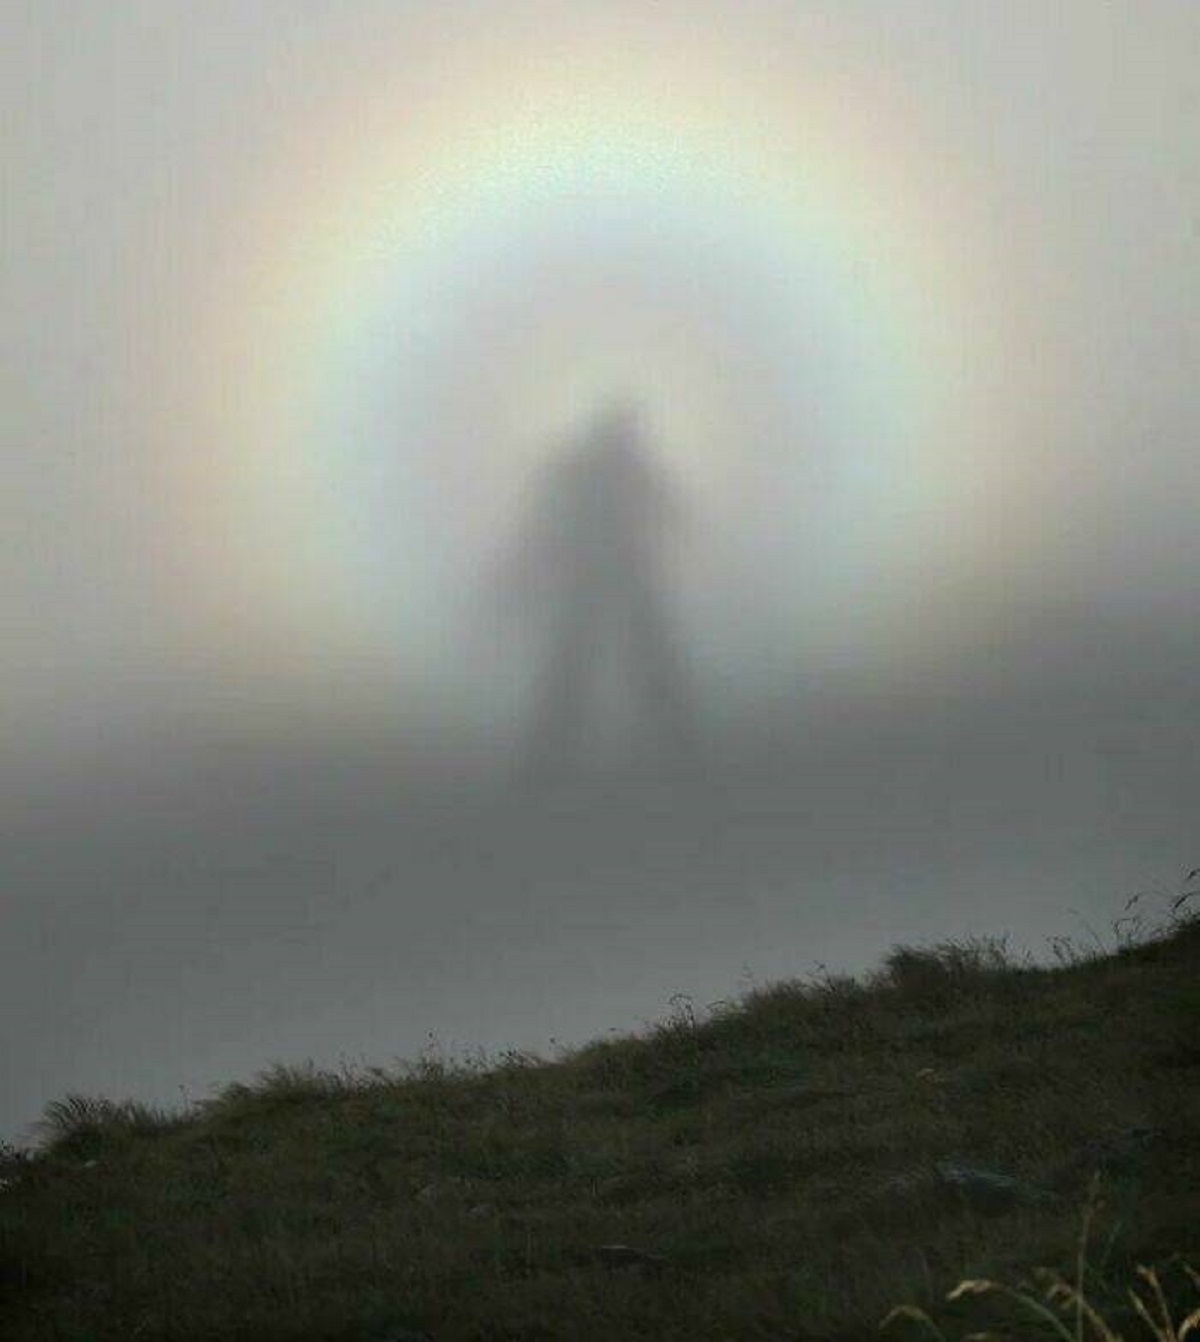 "A Rare Optic Sight, The "Brocken Spectre" Occurs When A Person Stands At A Higher Altitude In The Mountains And Sees His Shadow Cast On A Cloud At A Lower Altitude"